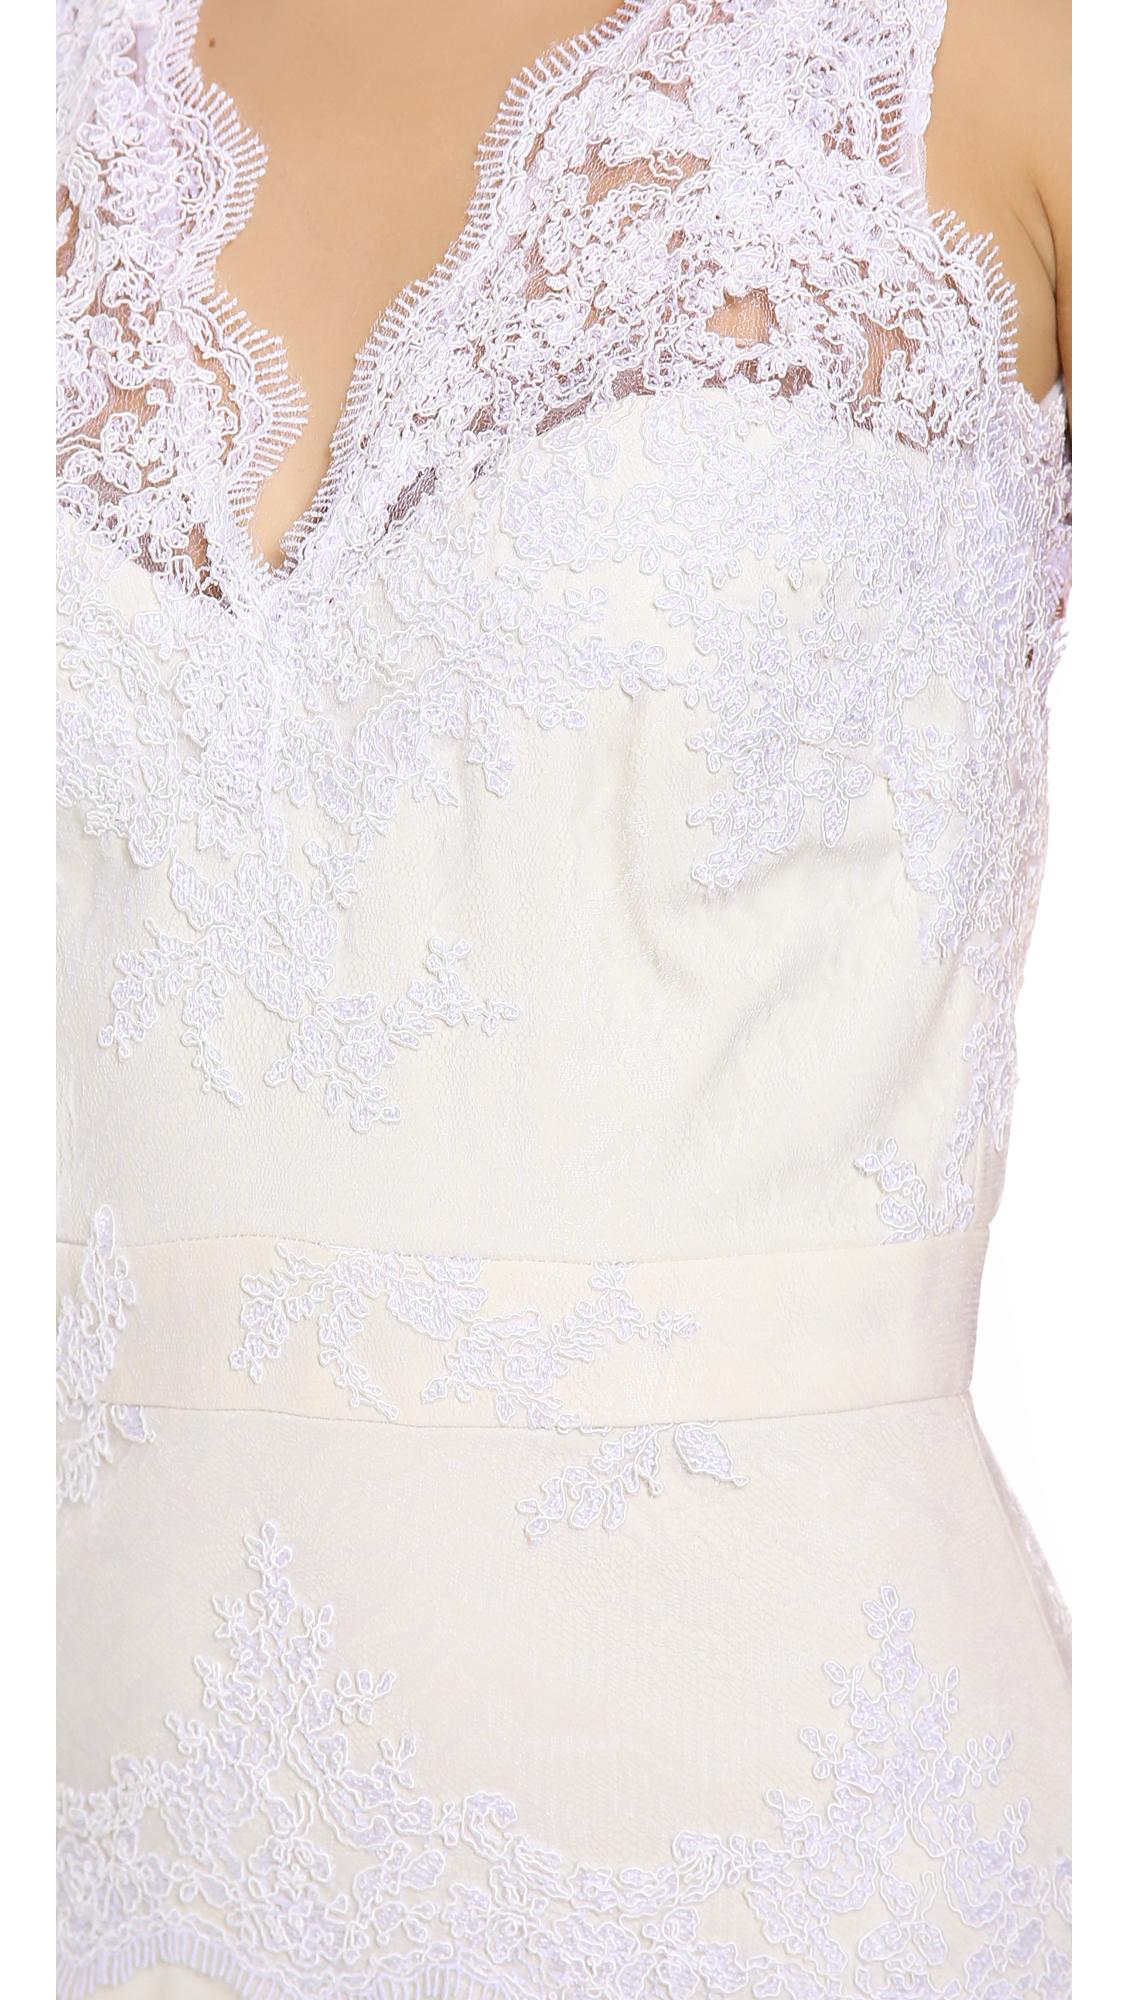 Lyst - Badgley Mischka Lace Open Back Peplum Gown in White